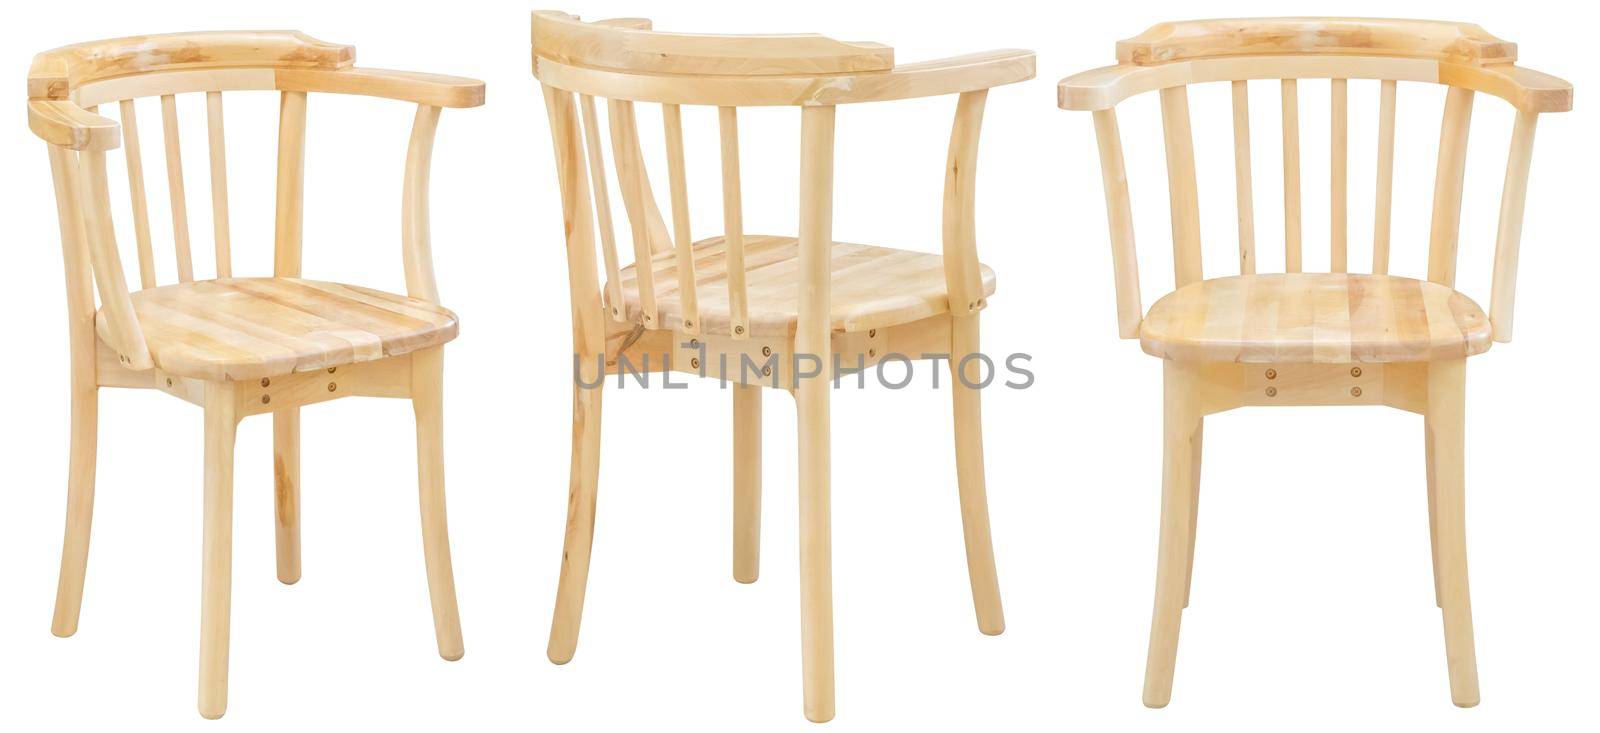 A chair made of natural wood in different angles. Isolated on a white background. Interior element